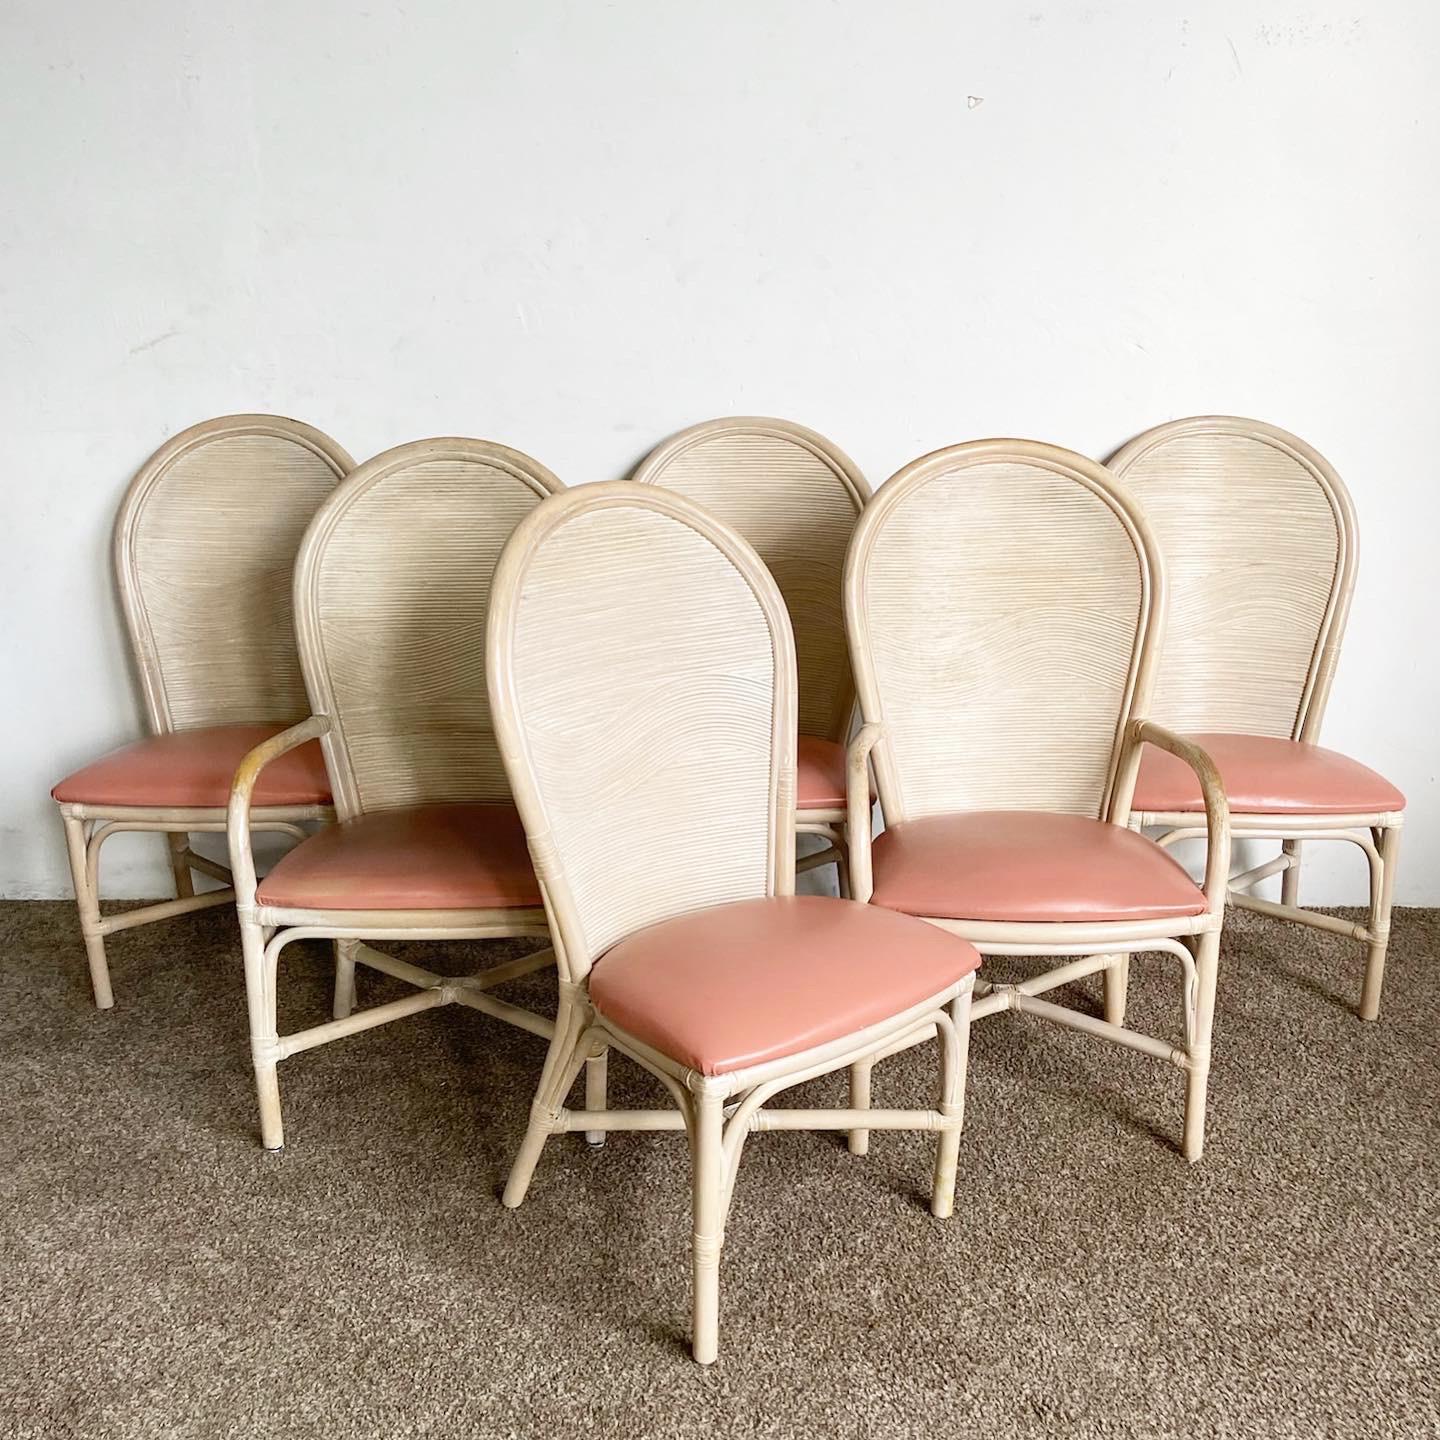 Enhance your dining space with our set of six Boho Chic Bamboo Rattan Wavy Pencil Reed Dining Chairs, featuring peach vinyl and whitewashed reed frames.

Intricately crafted bamboo and reed frame with a wavy design, finished in whitewash.
Soft peach